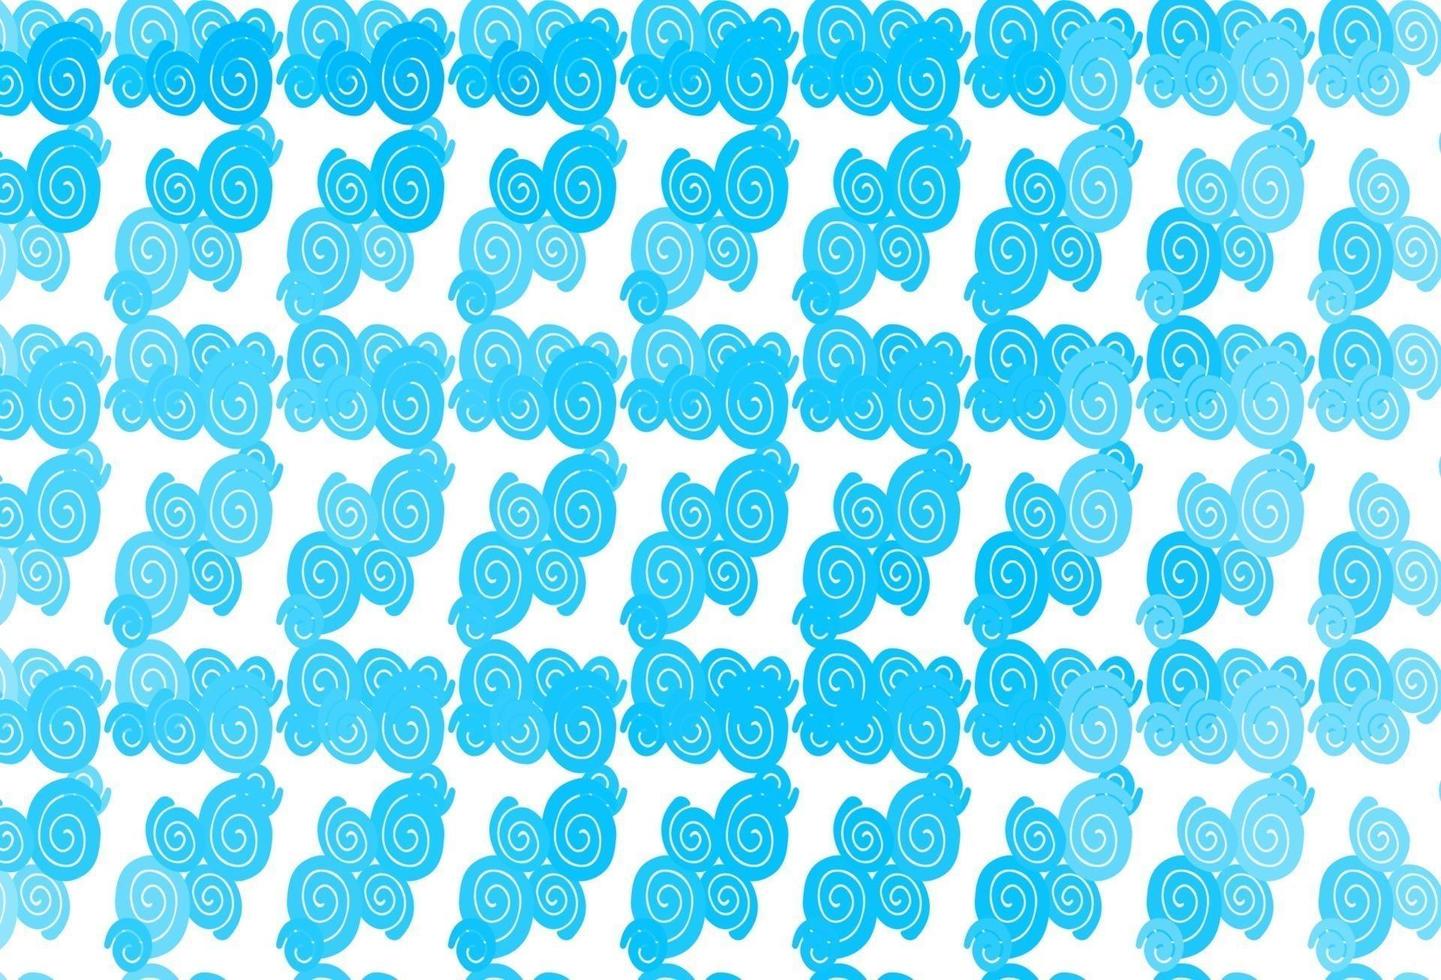 Light BLUE vector pattern with bubble shapes.